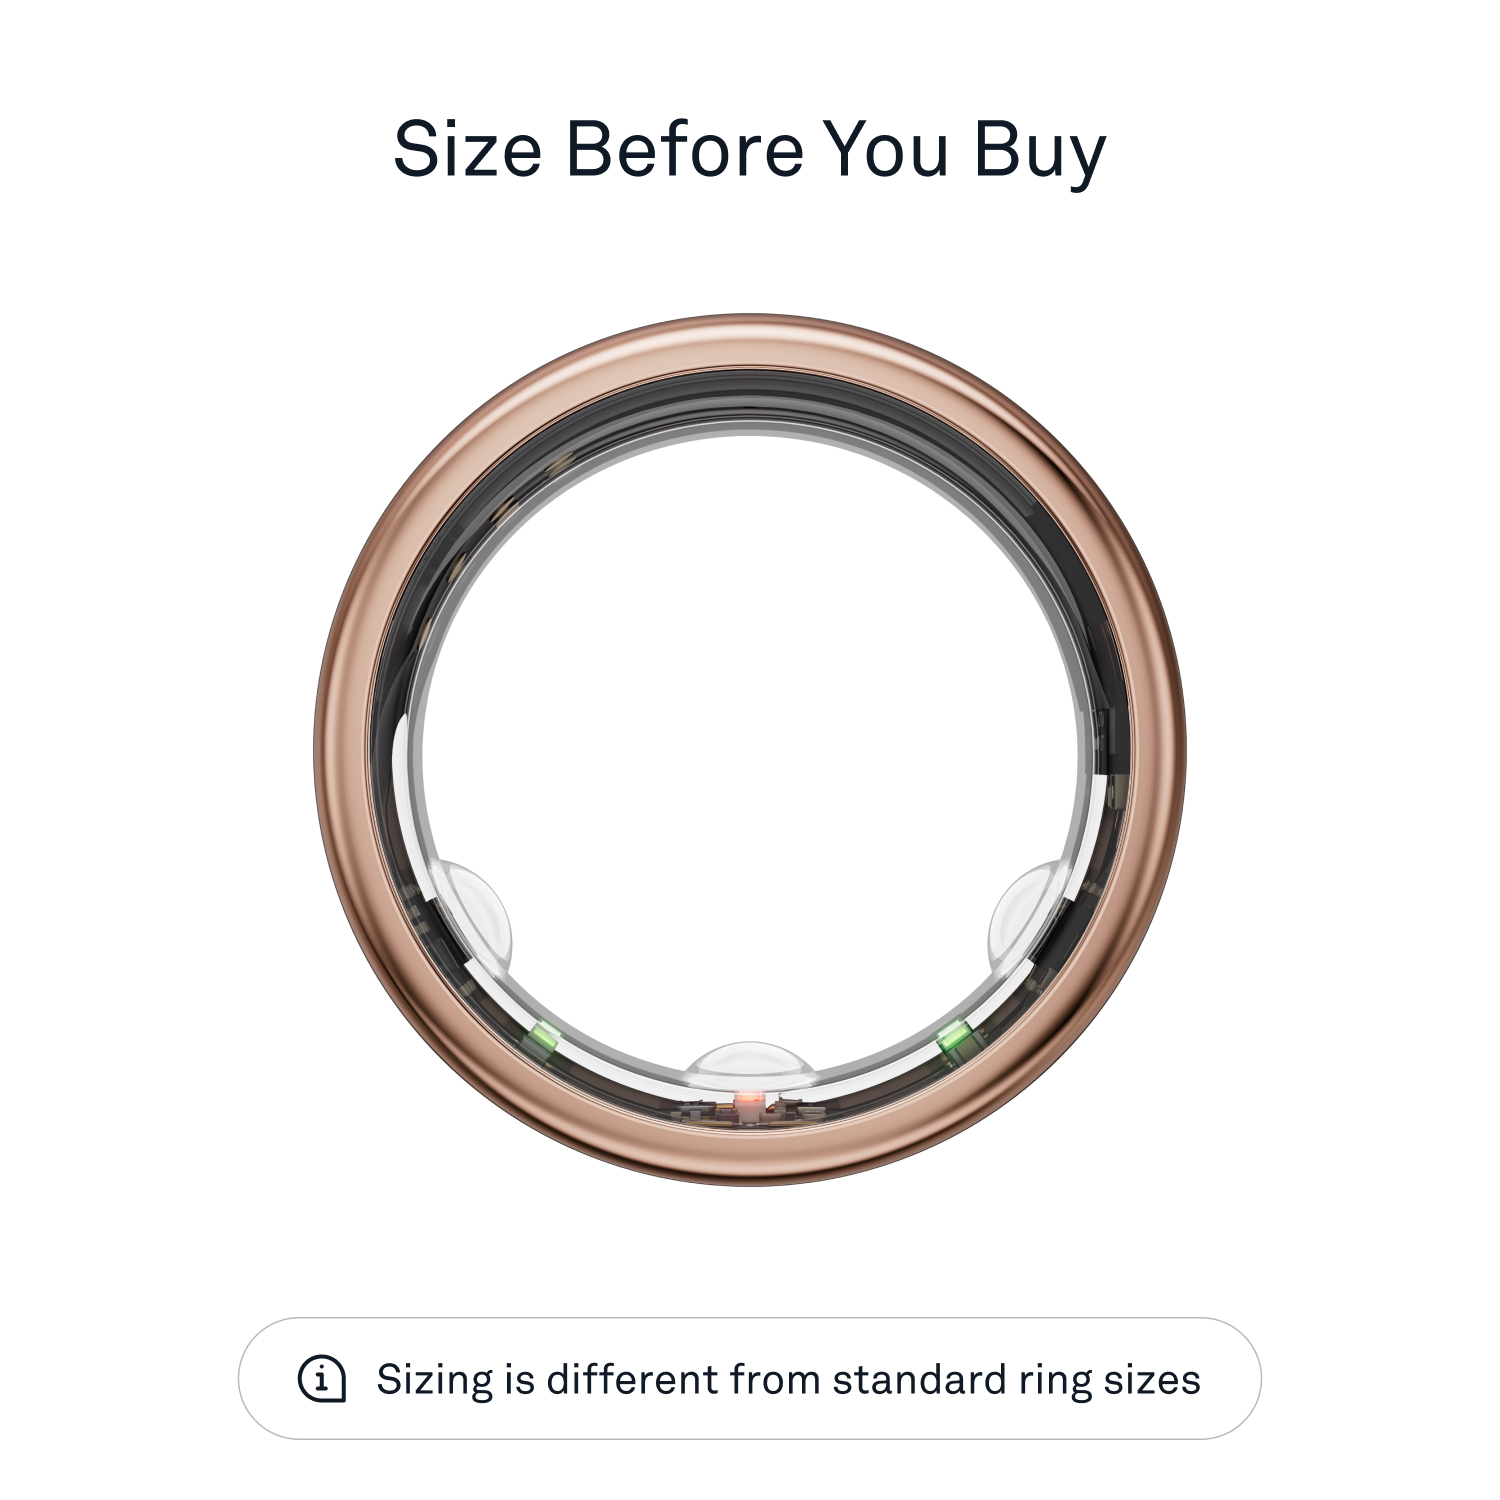 Oura Ring Gen3 Horizon Size Before You Buy Size 8 Rose Gold JZ90-51386-08 -  Best Buy